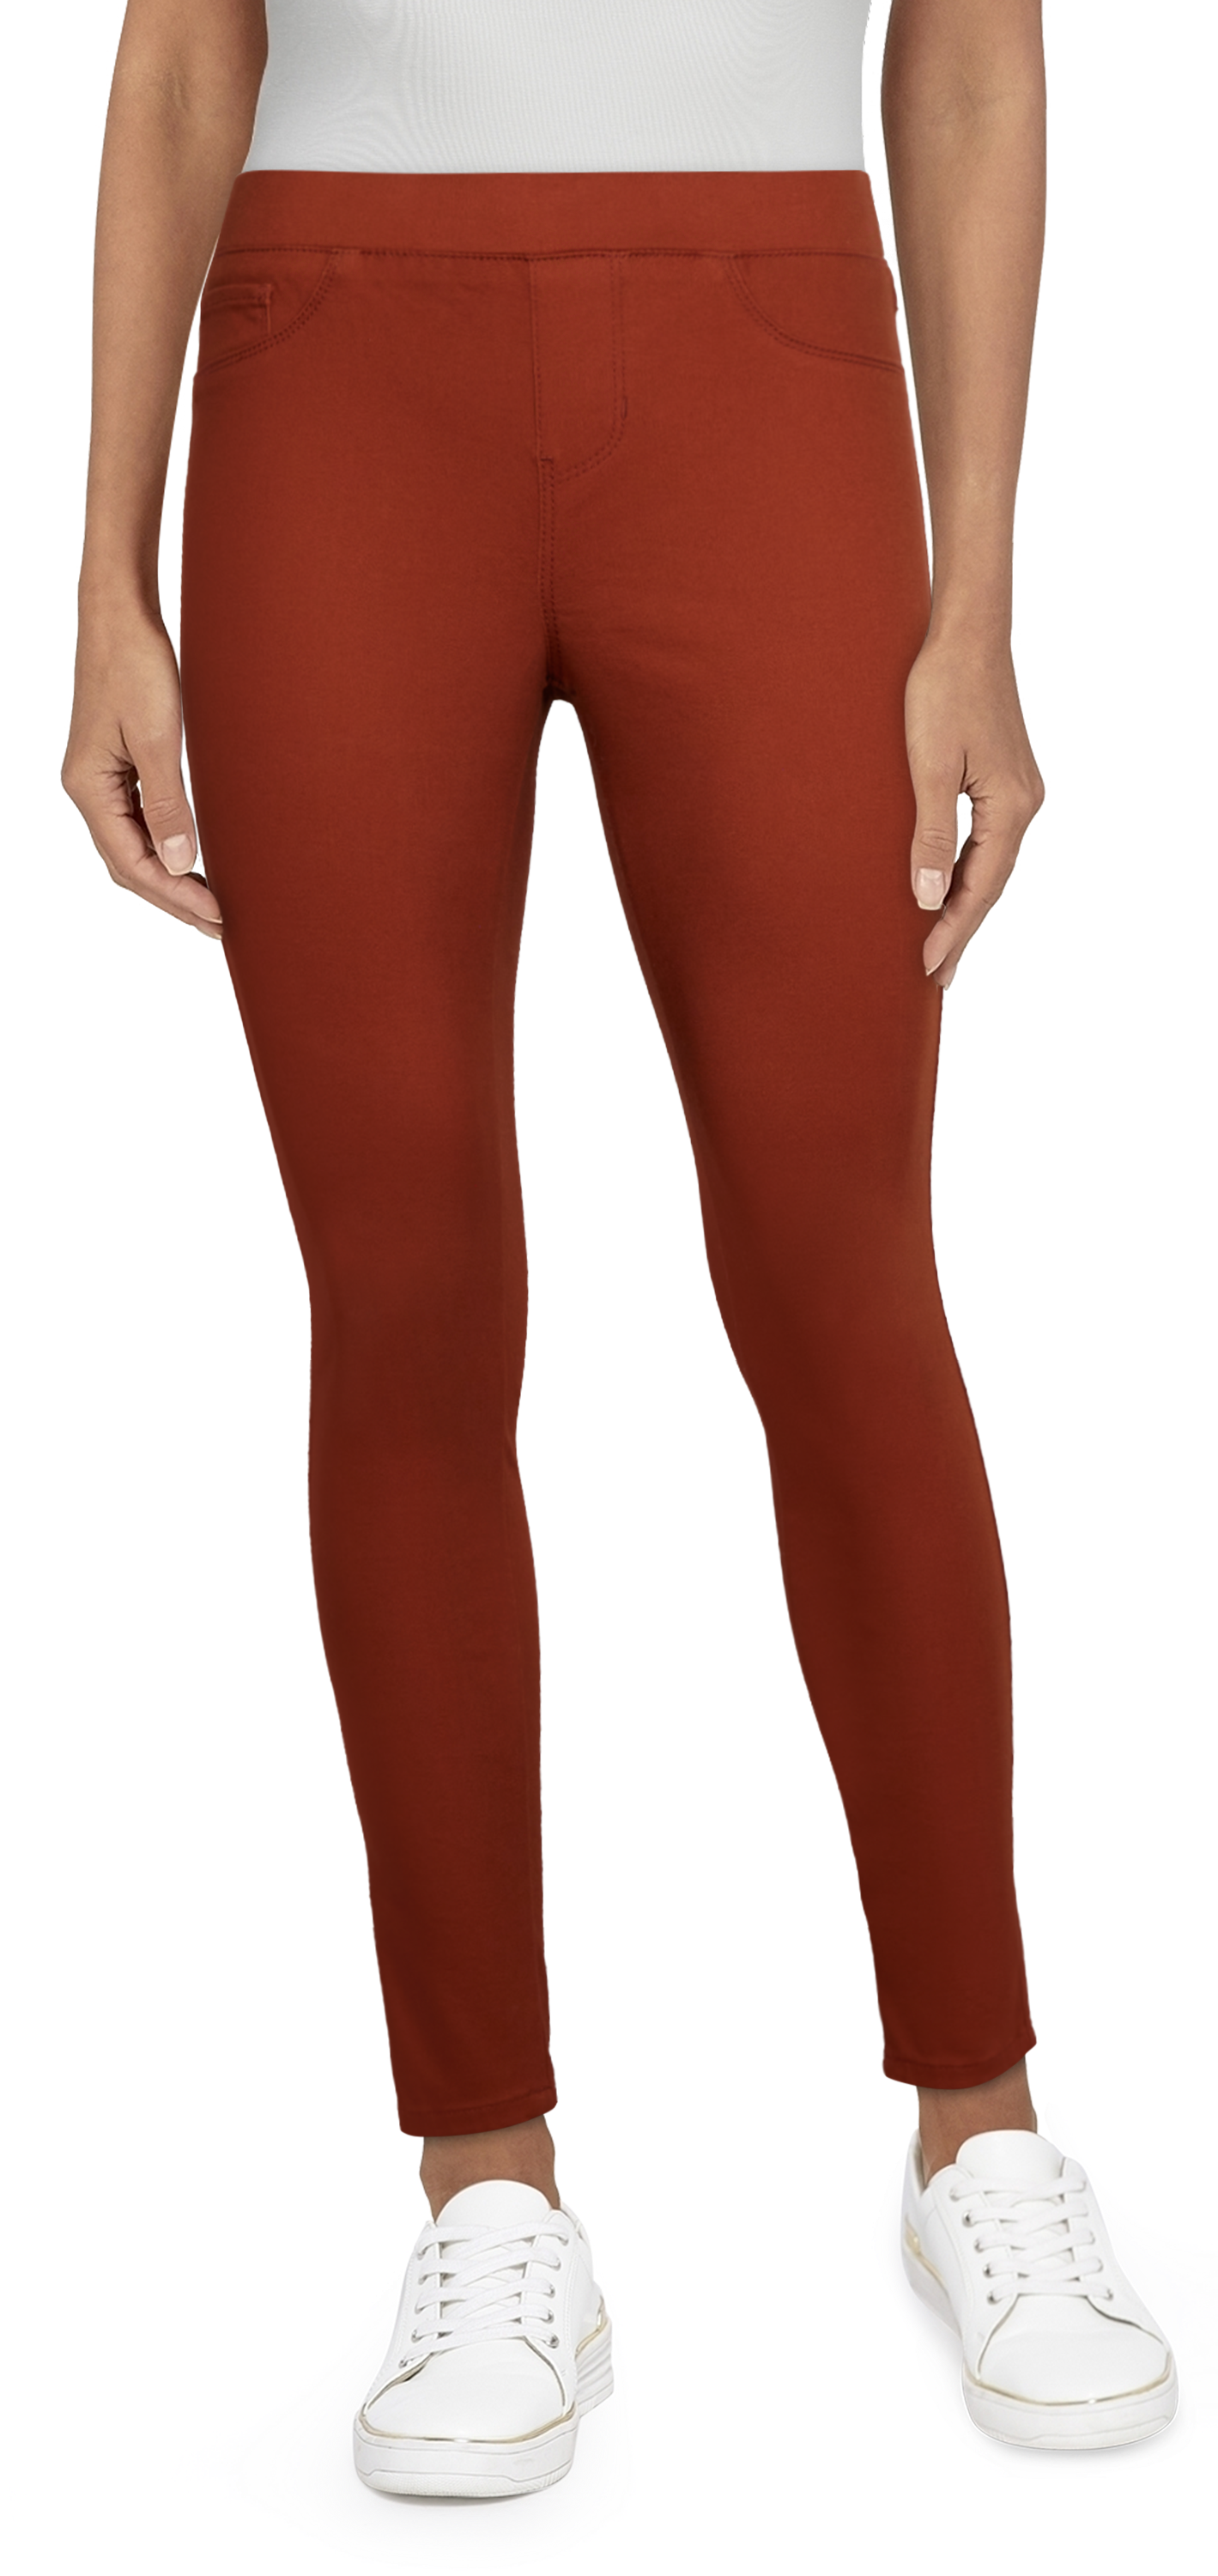 Natural Reflections Lucy REPREVE Pull-On Jeggings for Ladies